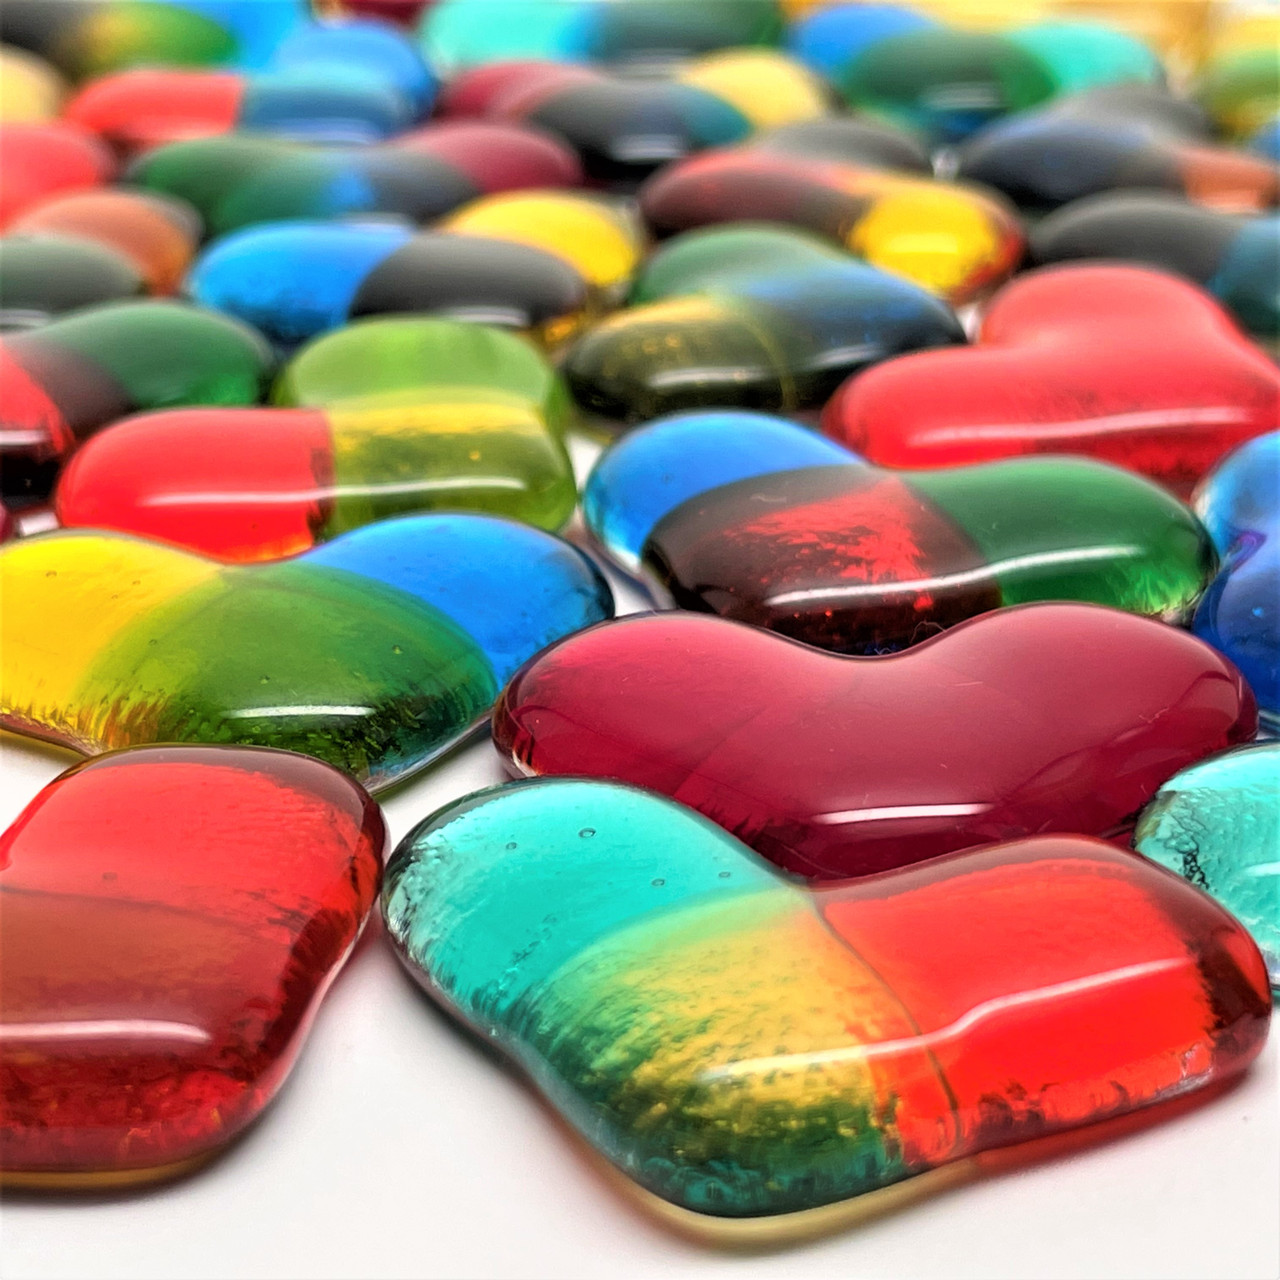 FUSED Stained Glass Tiles, HEARTS, 5pcs, Translucent